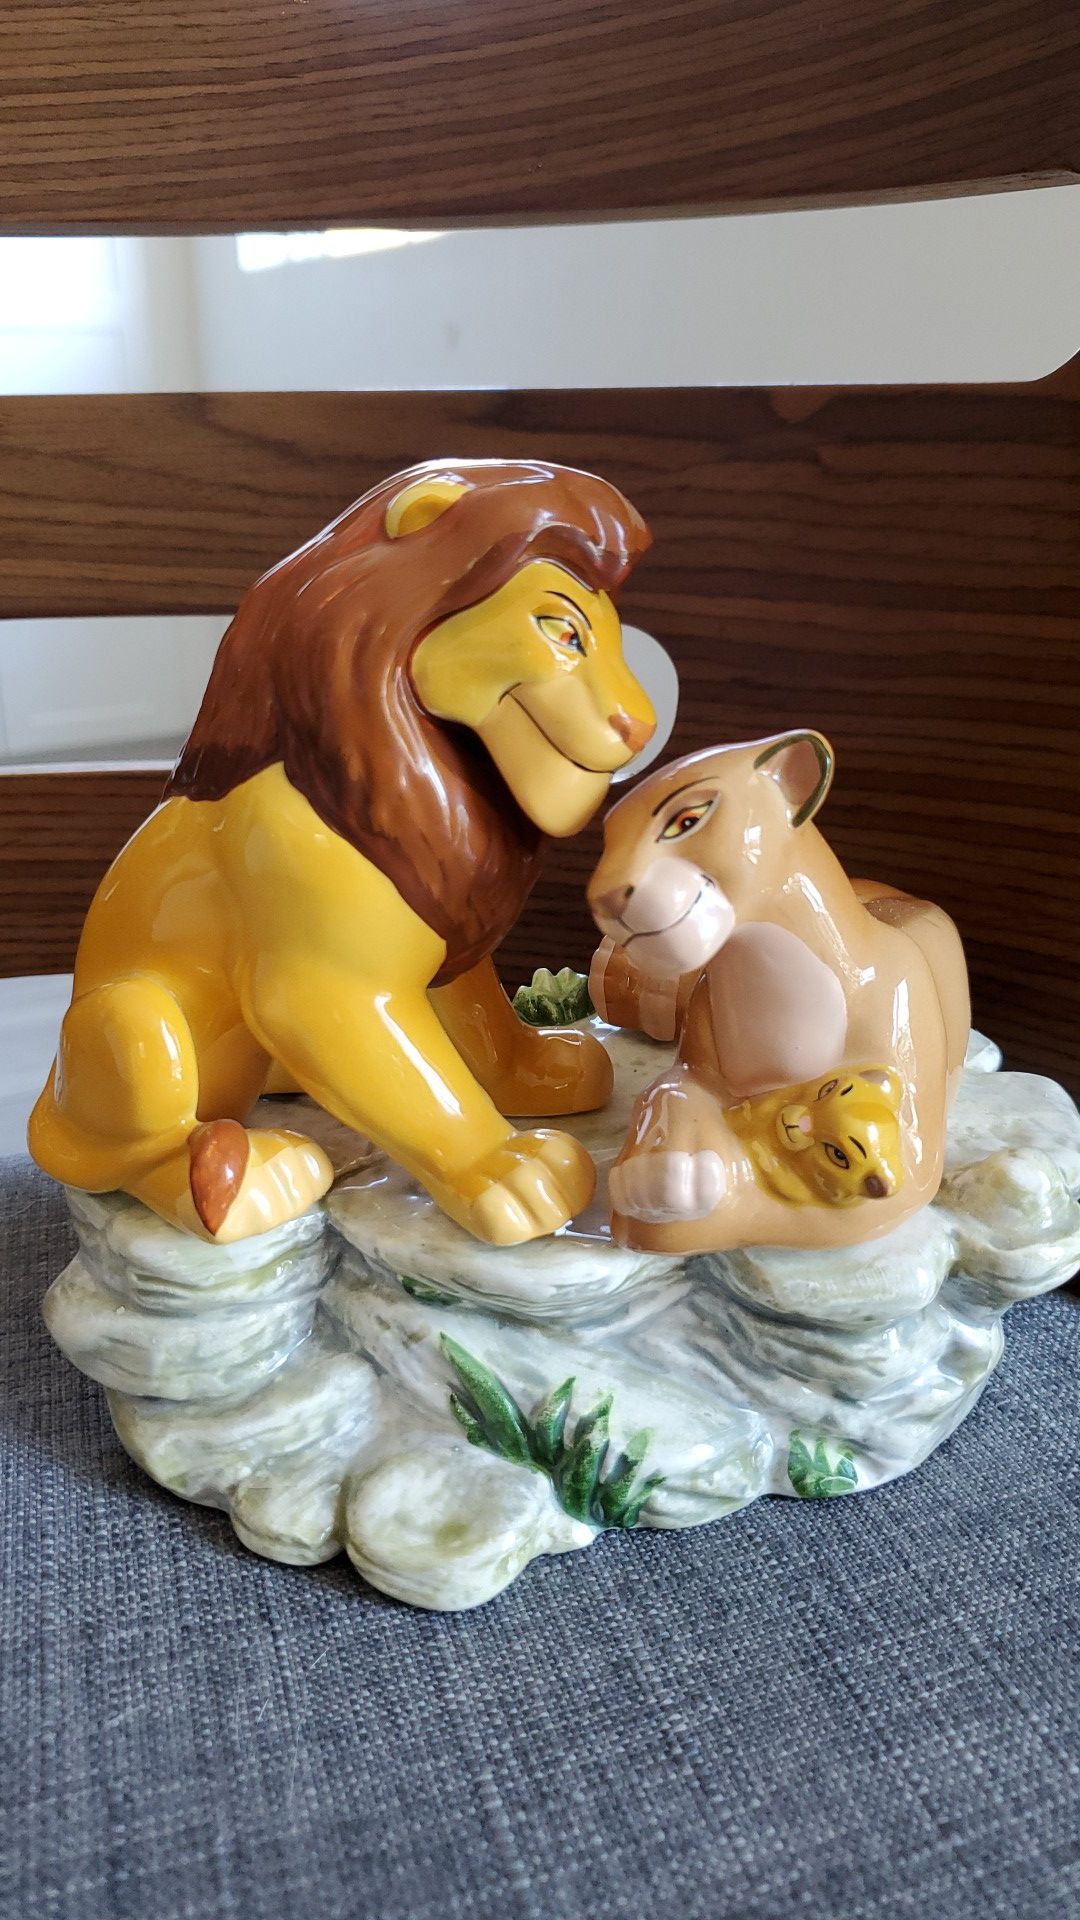 Disney The Lion King Music Box statue collectible Schmid